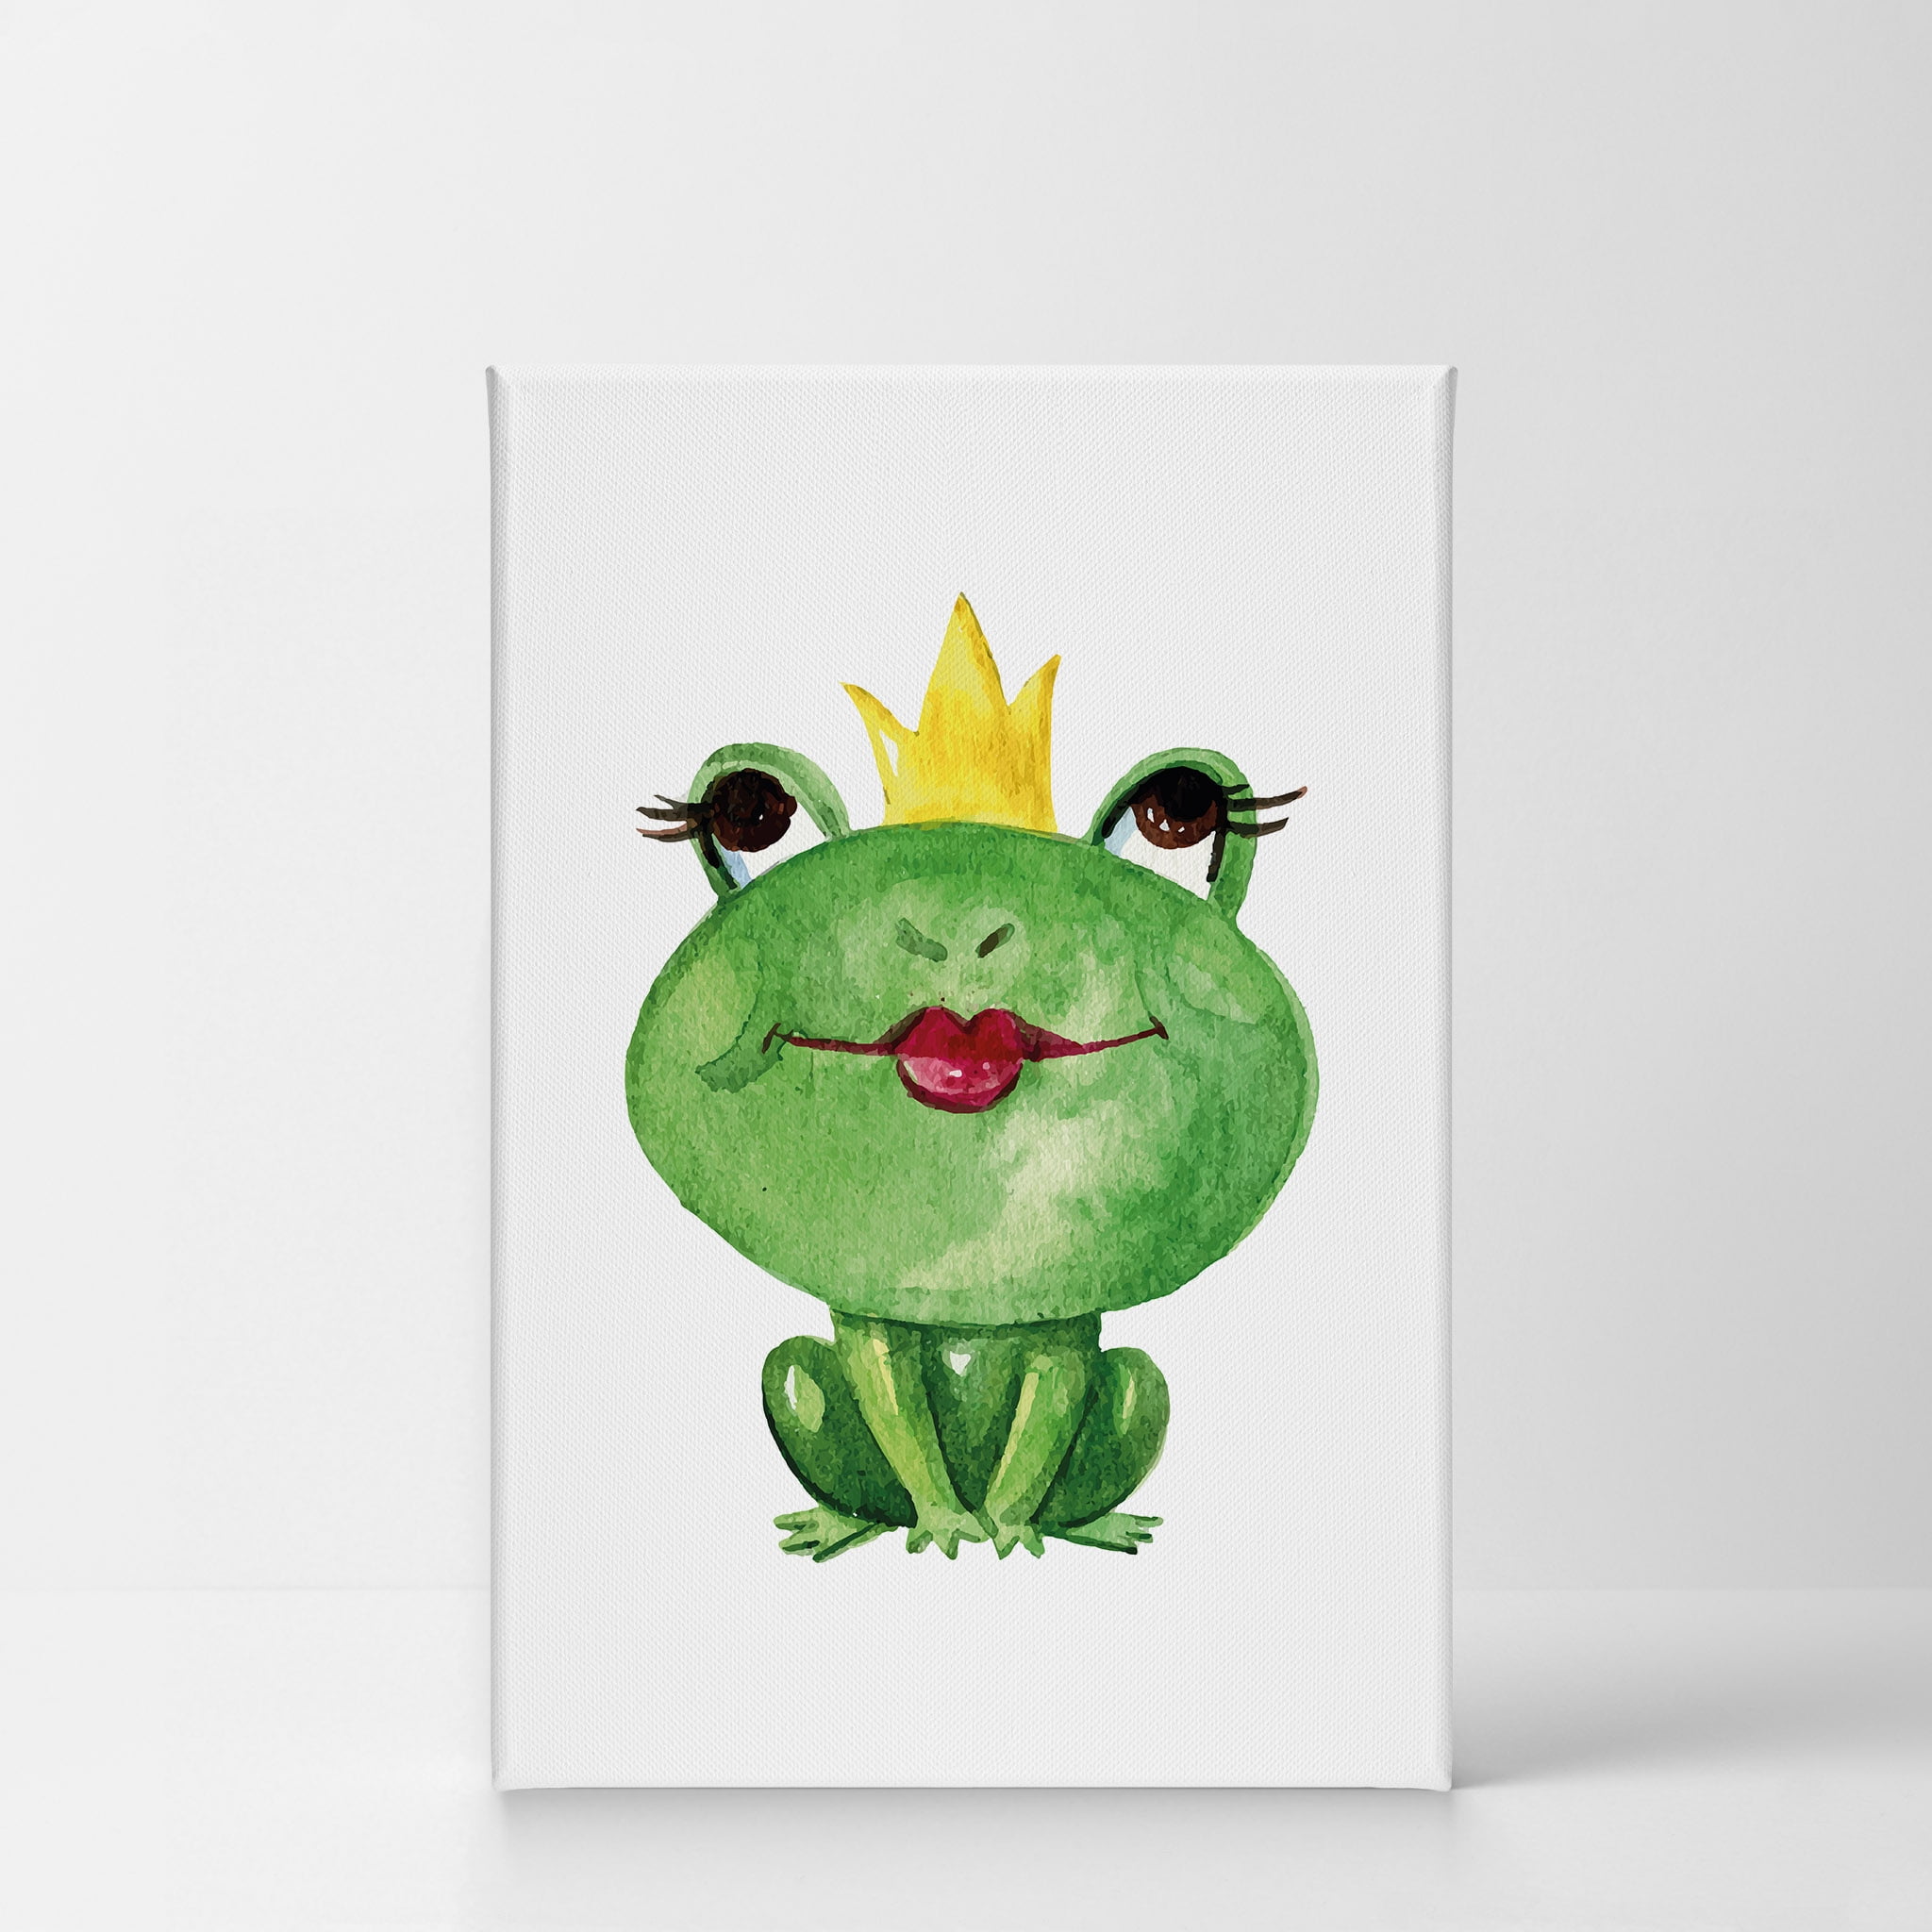 Smile Art Design Beautiful Princess Frog Red Lips Watercolor Painting Illustration Animal Canvas Wall Art Print Office Living Room Bedroom Kids Girl Boy Baby Nursery Room Decor Ready To Hang 36x24